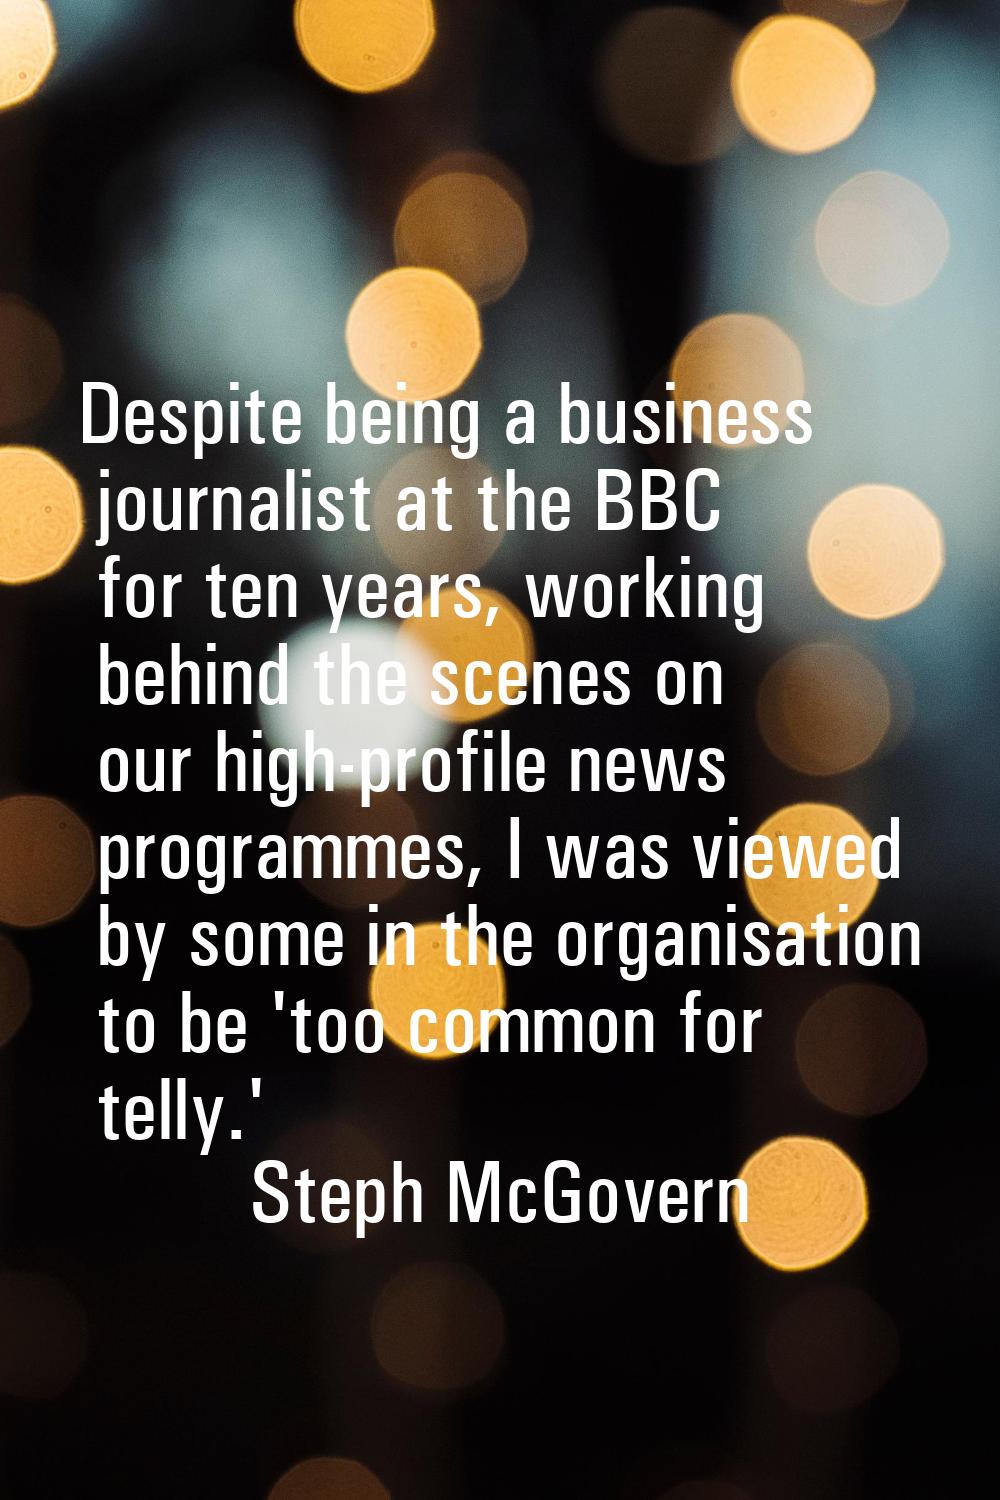 Despite being a business journalist at the BBC for ten years, working behind the scenes on our high